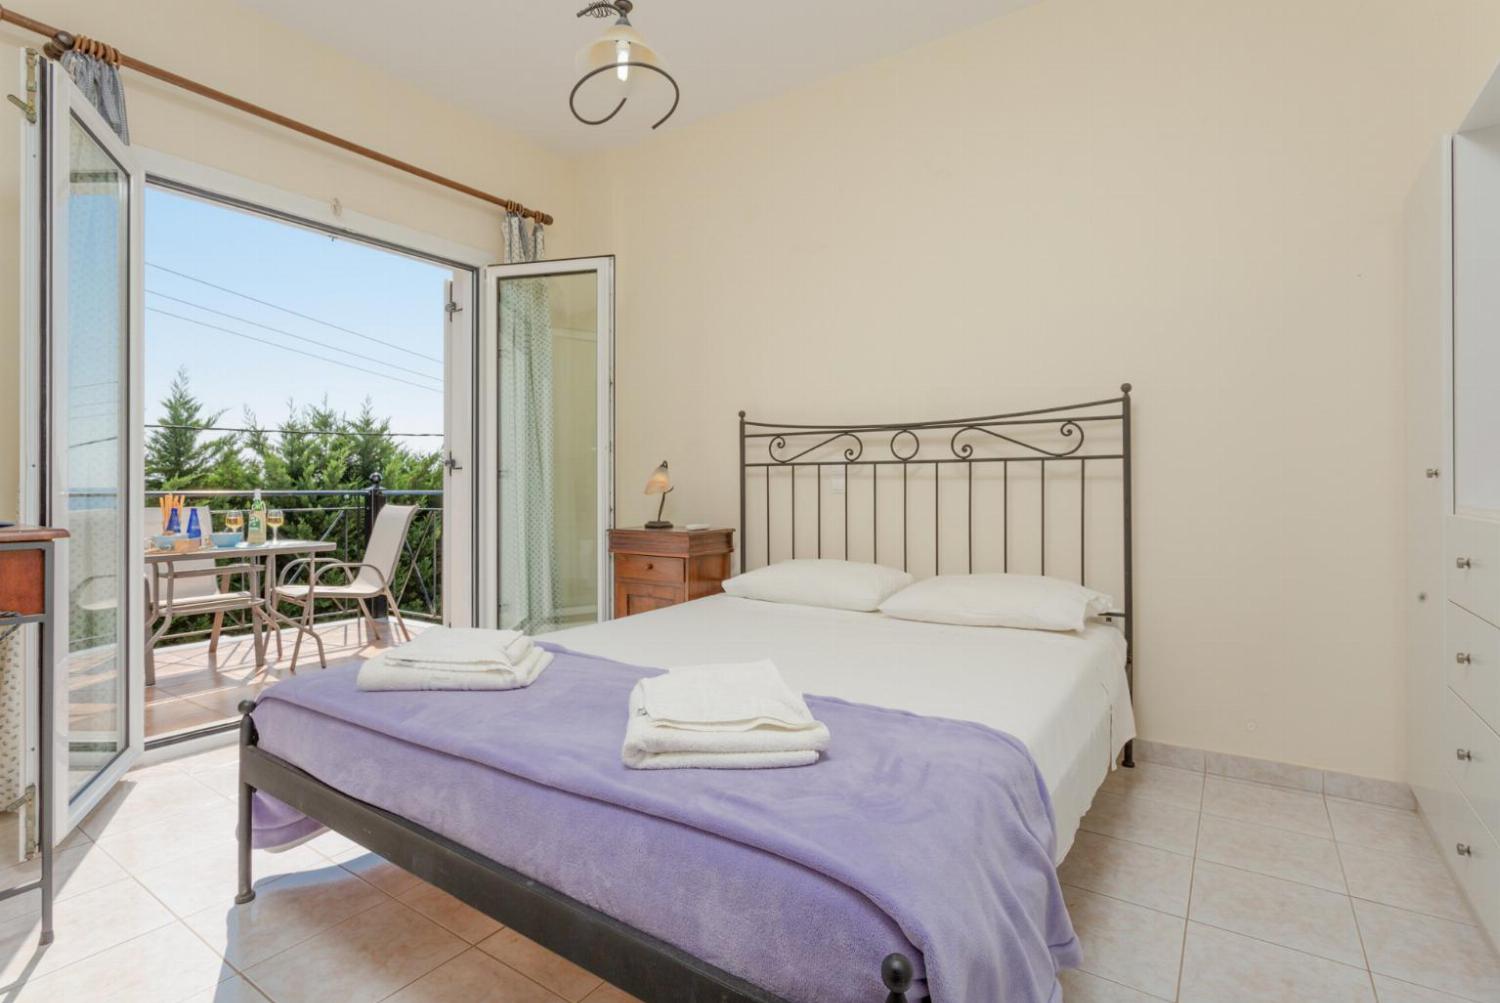 Double bedroom with A/C and terrace access to sea views